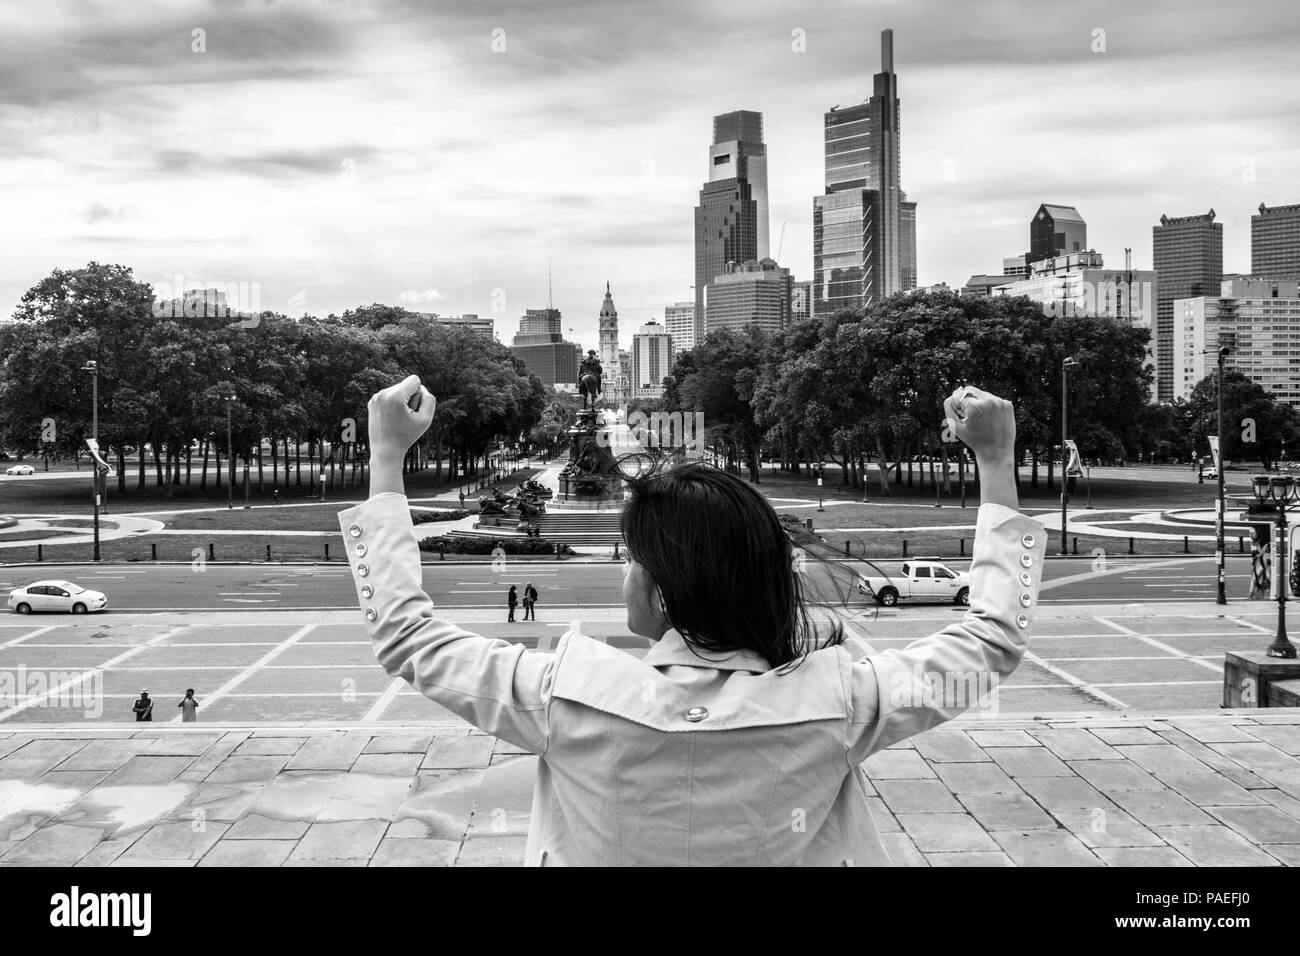 A young woman flexing and imitating the famous Rocky pose as a symbol of women empowerment - Rocky Steps, The Oval, Philadelphia, USA Stock Photo